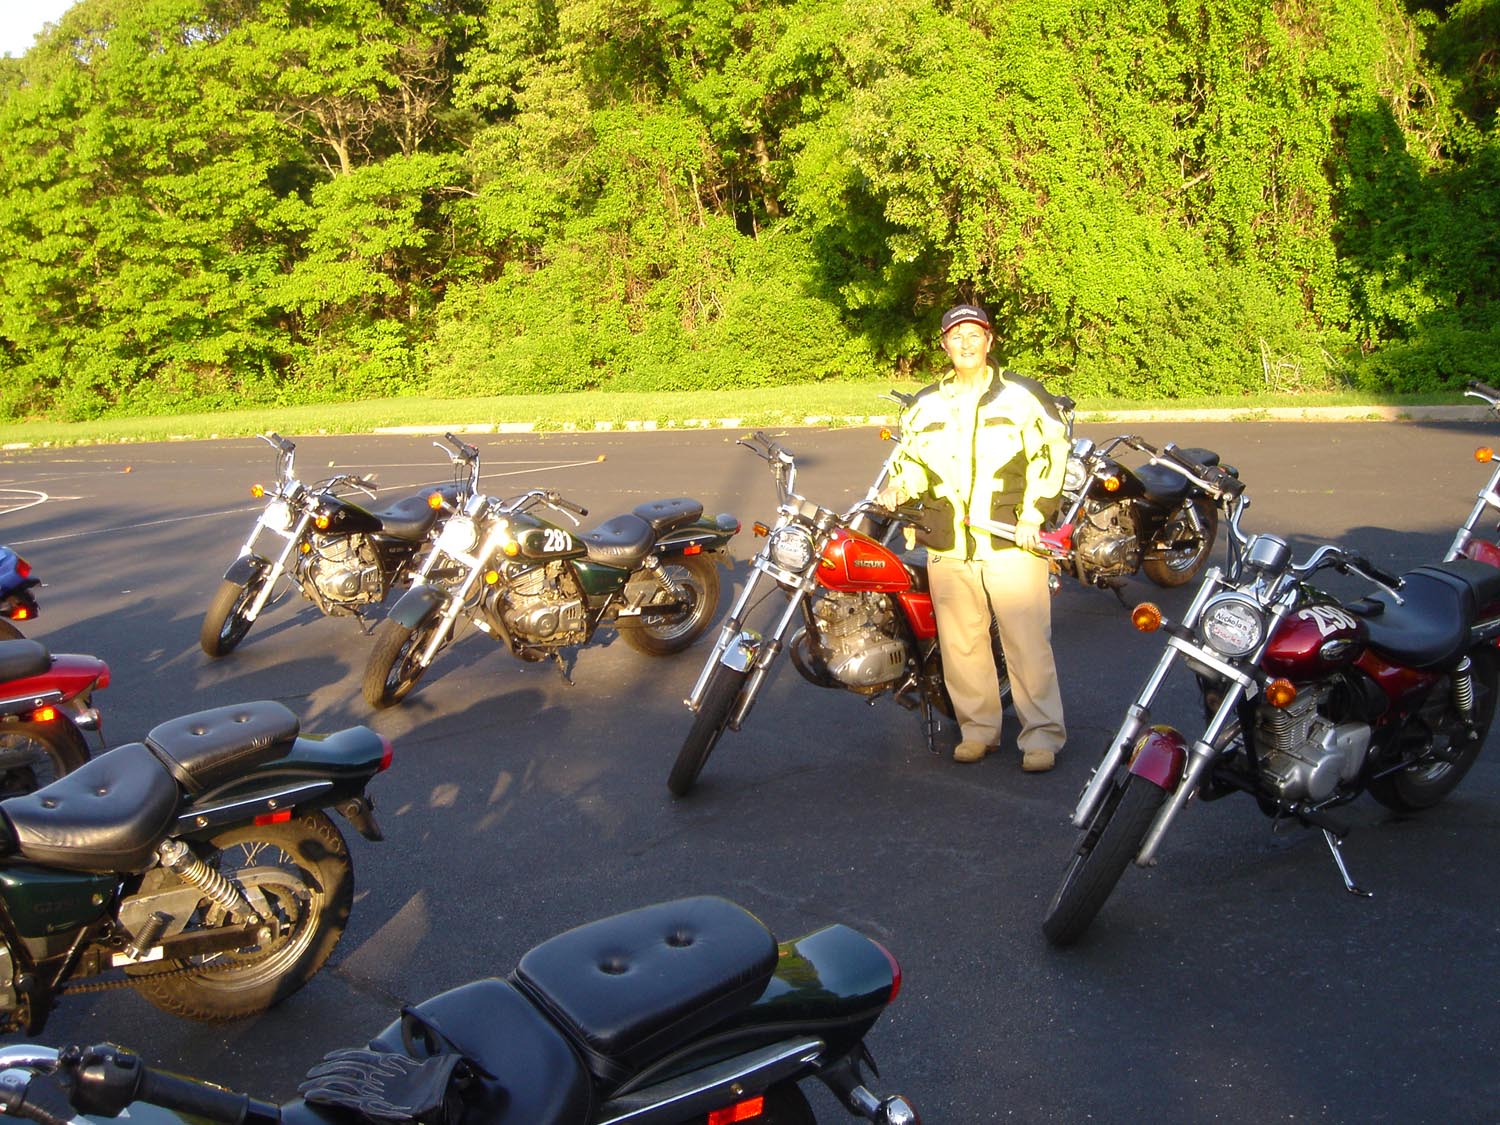 Jerry became an MSF RiderCoach and taught motorcycle classes for more than 20 years.